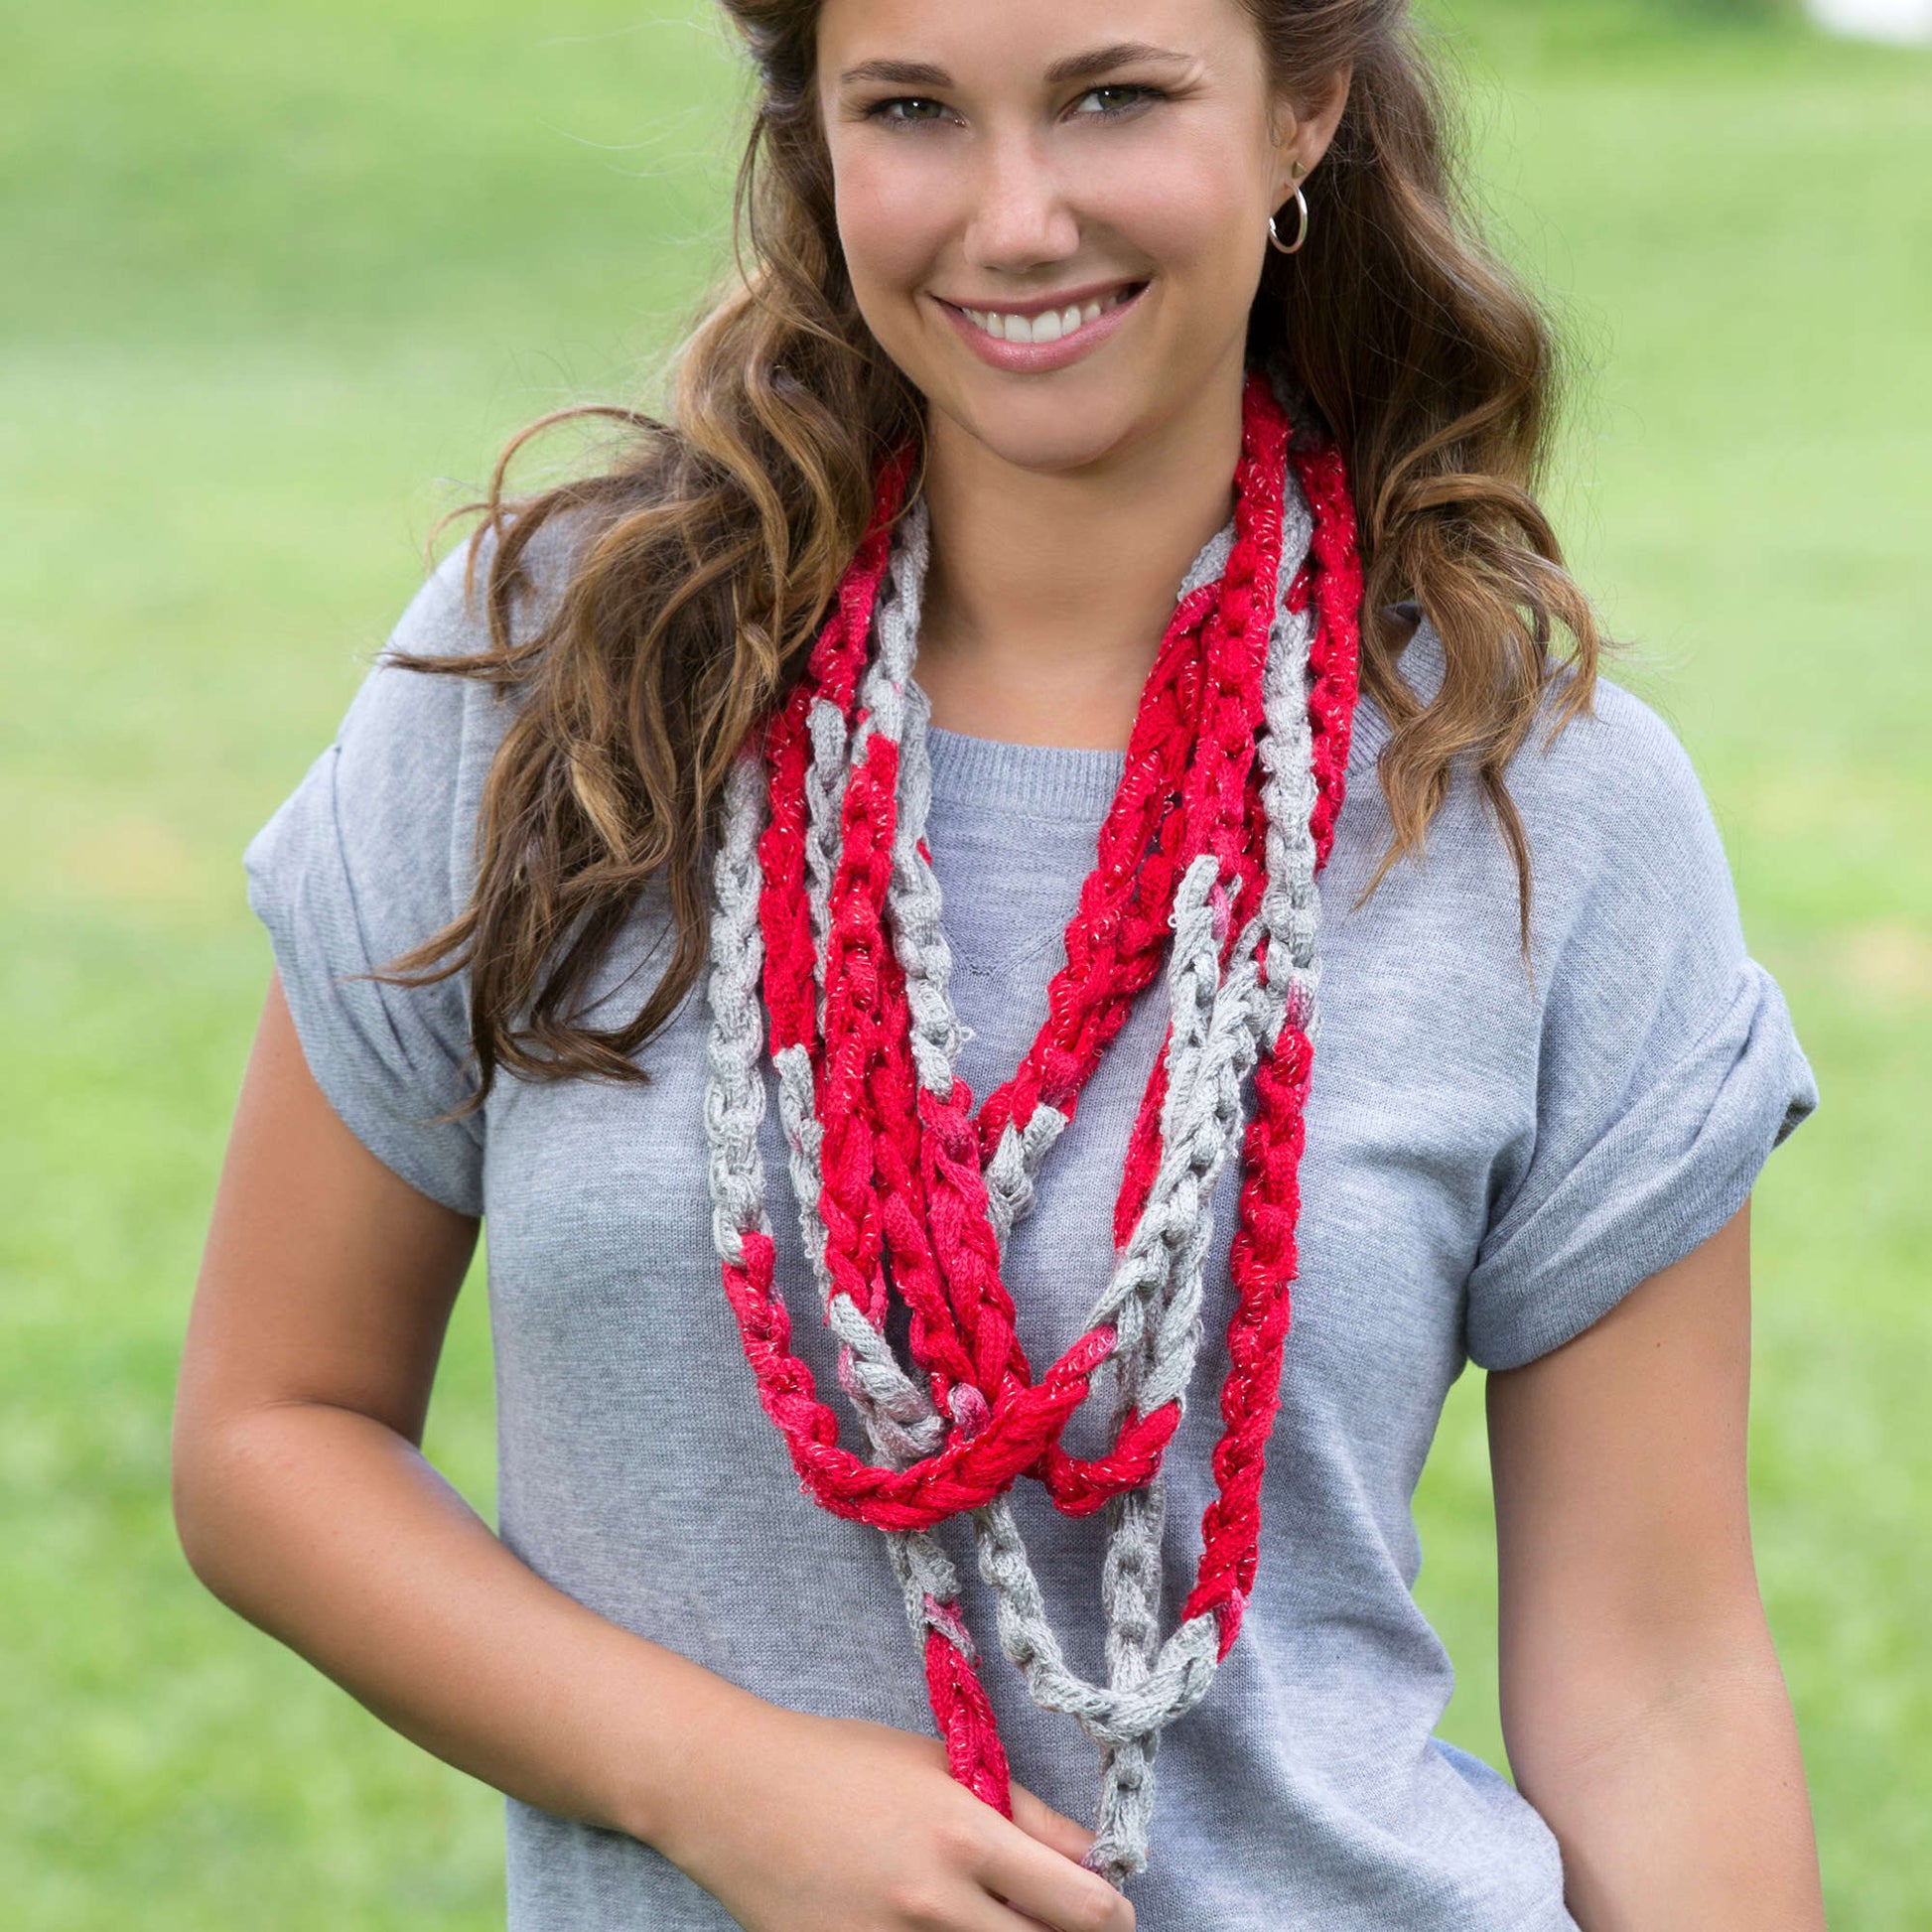 Free Red Heart Go Team Hand Chain Scarf Craft Pattern